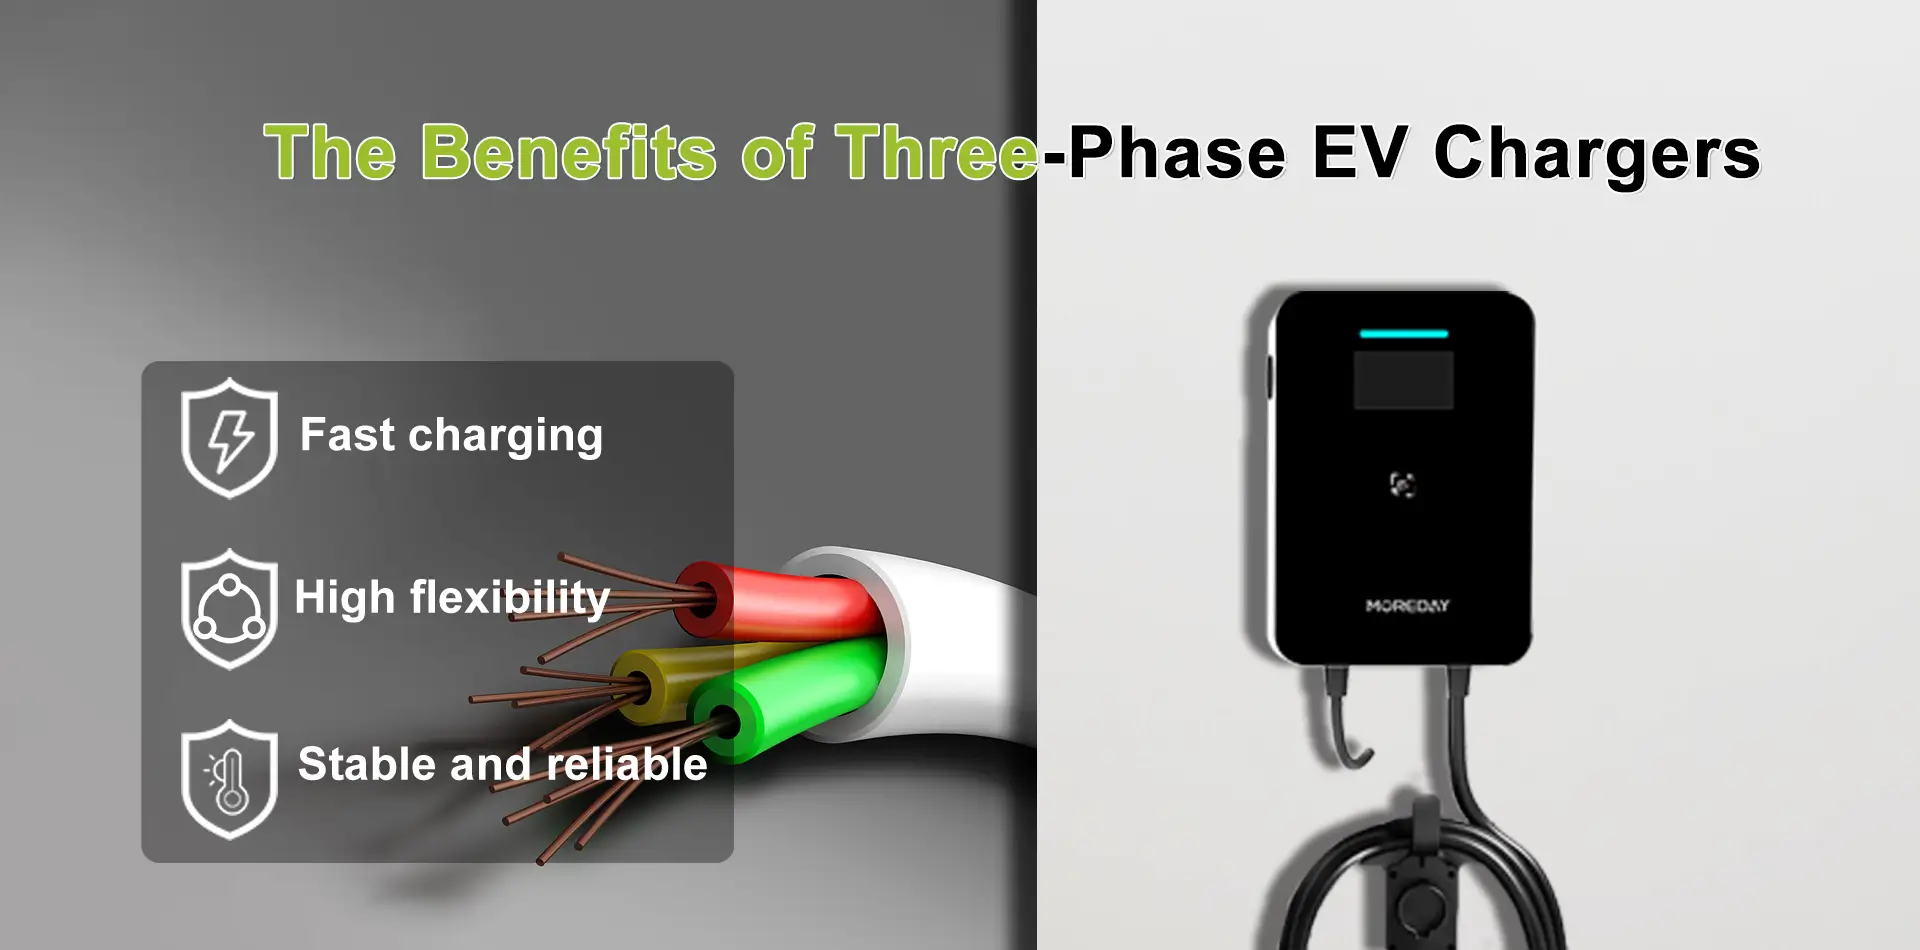 The Benefits of Three-Phase EV Chargers